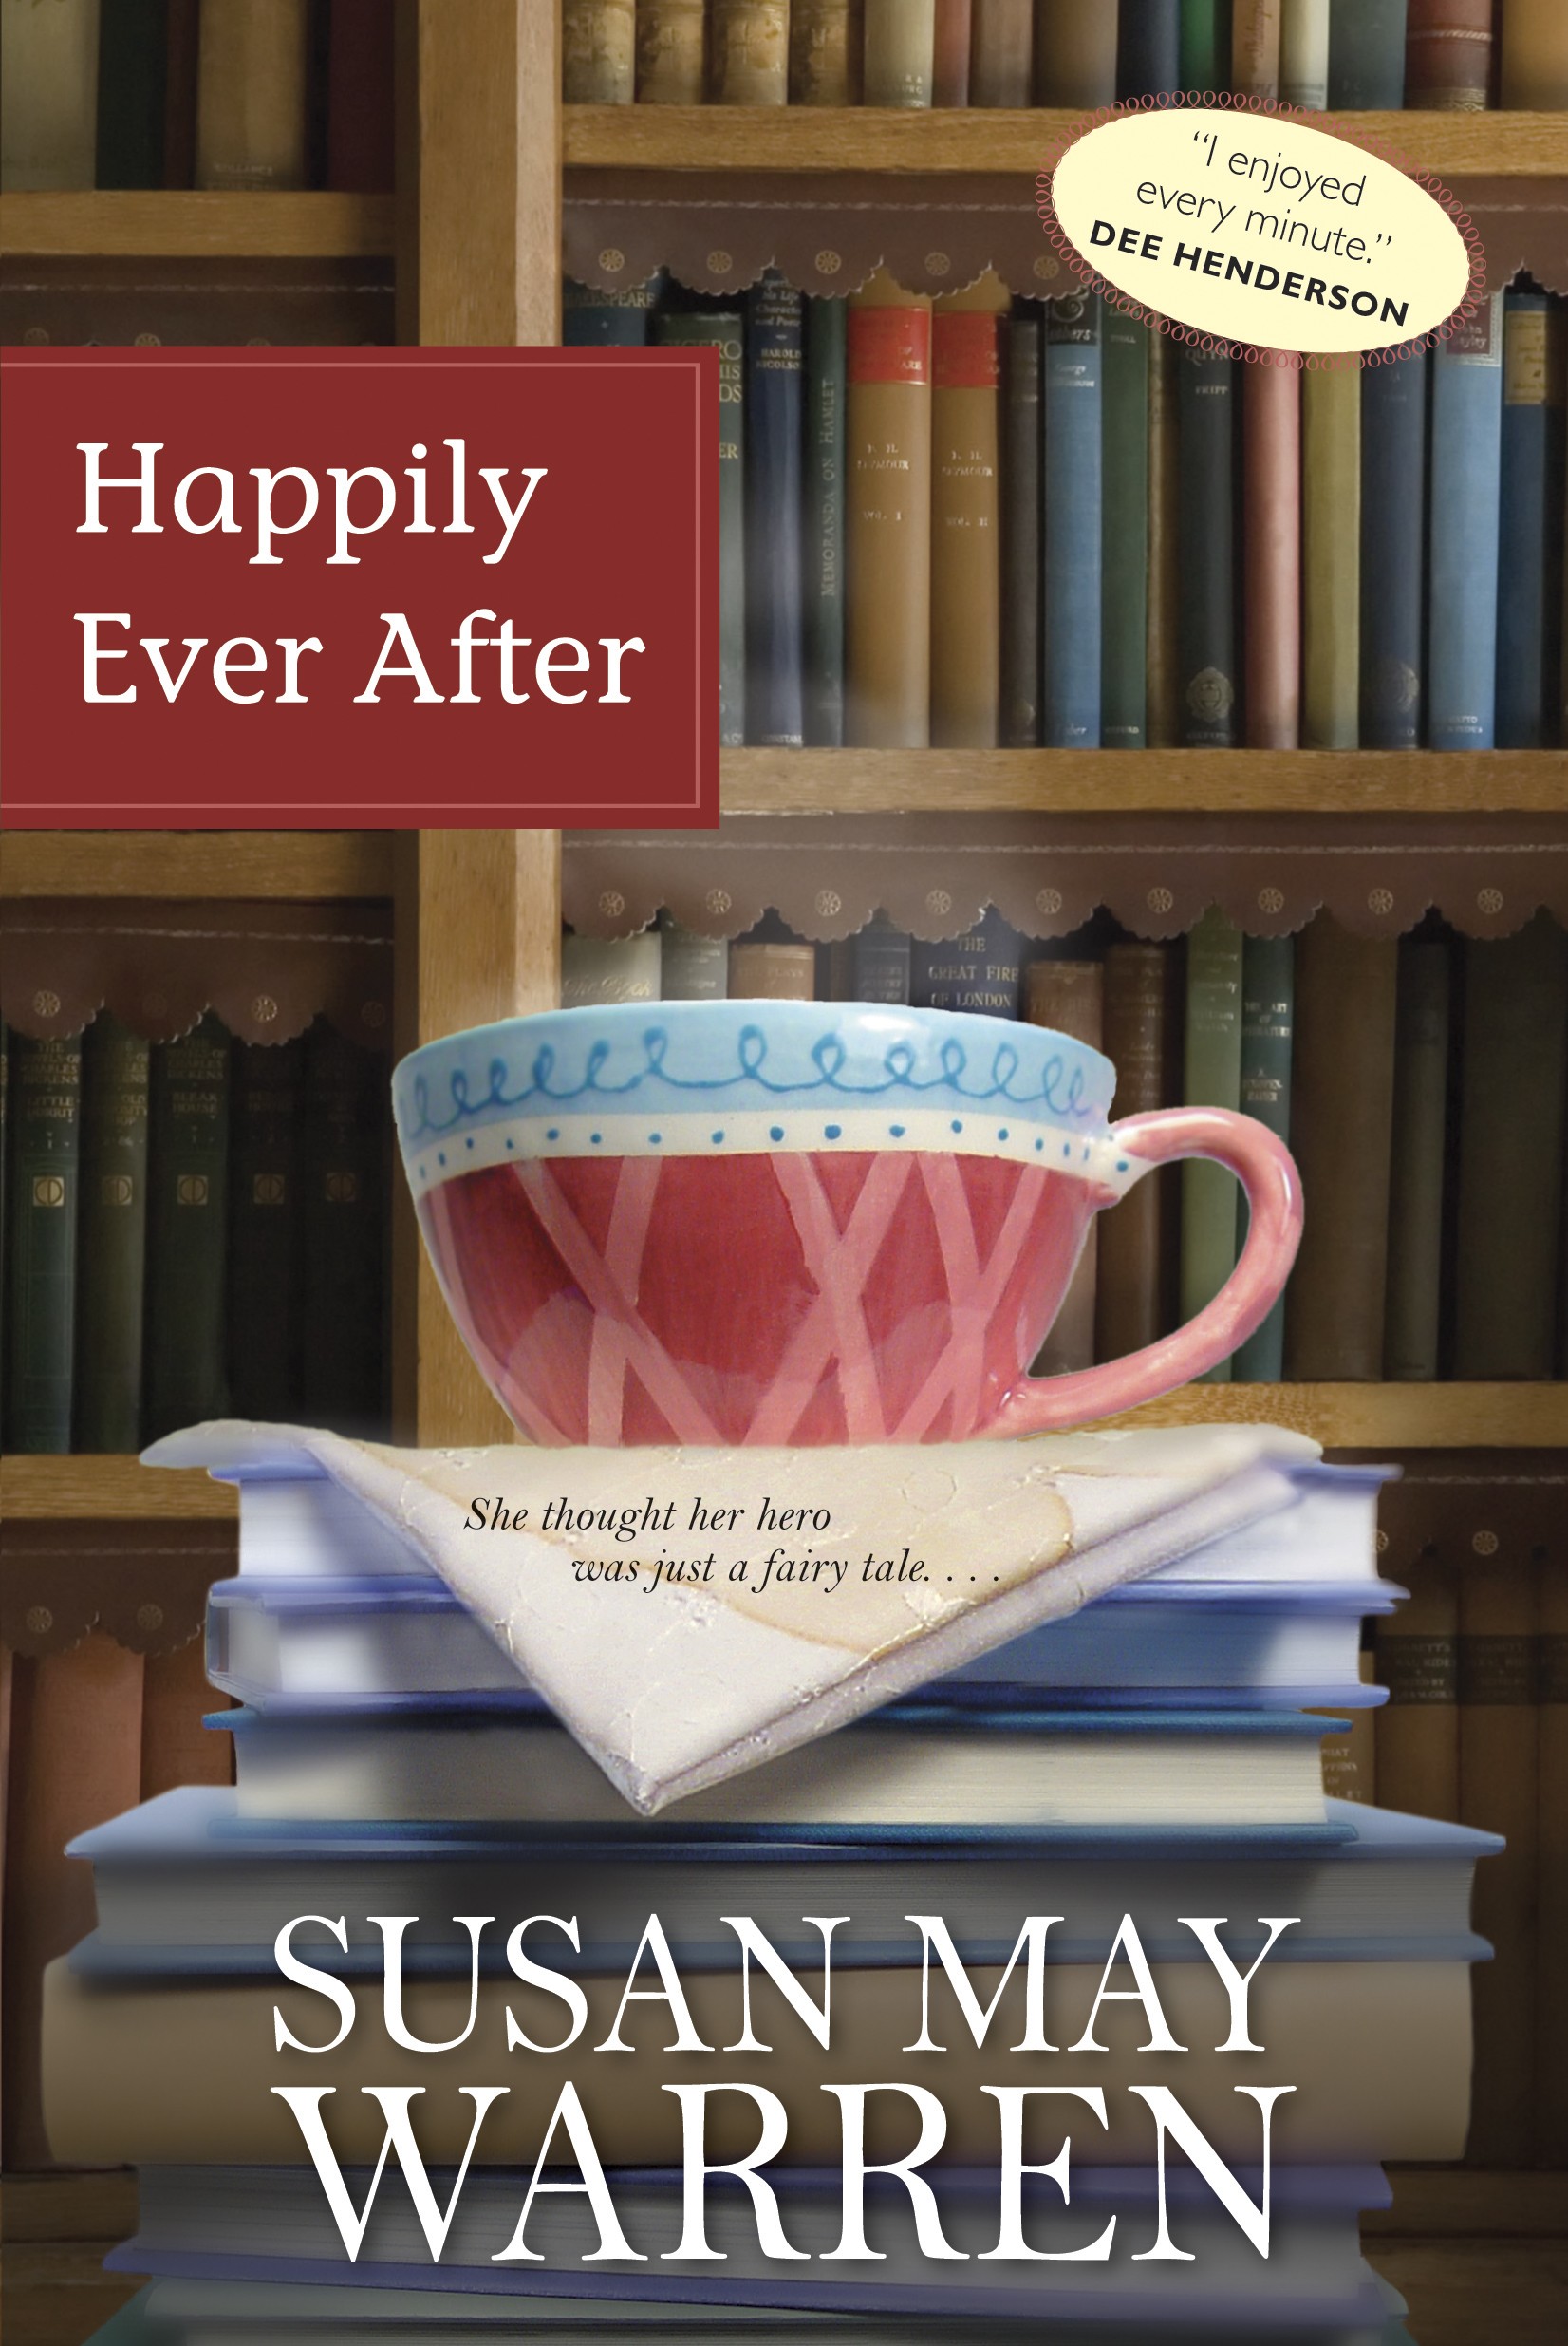 Deep Haven:  Happily Ever After